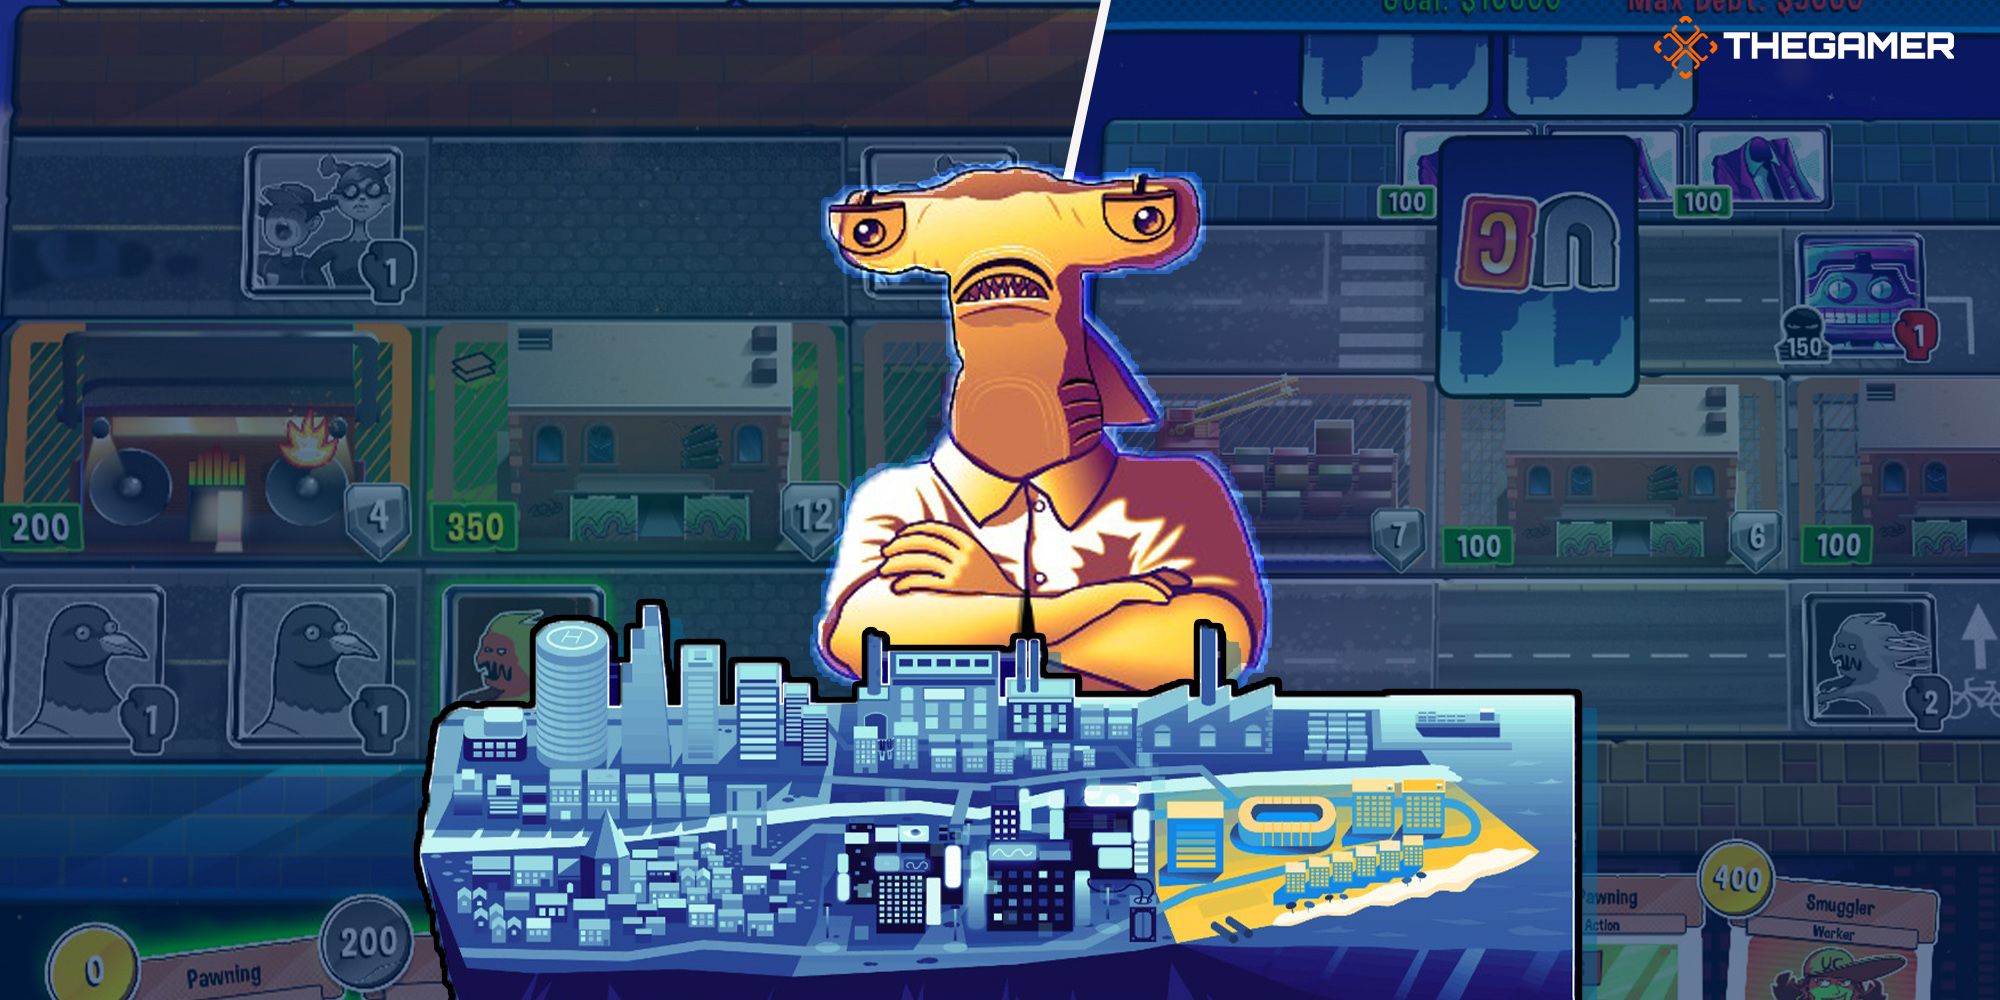 A Hammerhead Shark overlooks the city setting of Urban Cards. In the background, there are two screenshots featuring Urban Cards' gameplay.